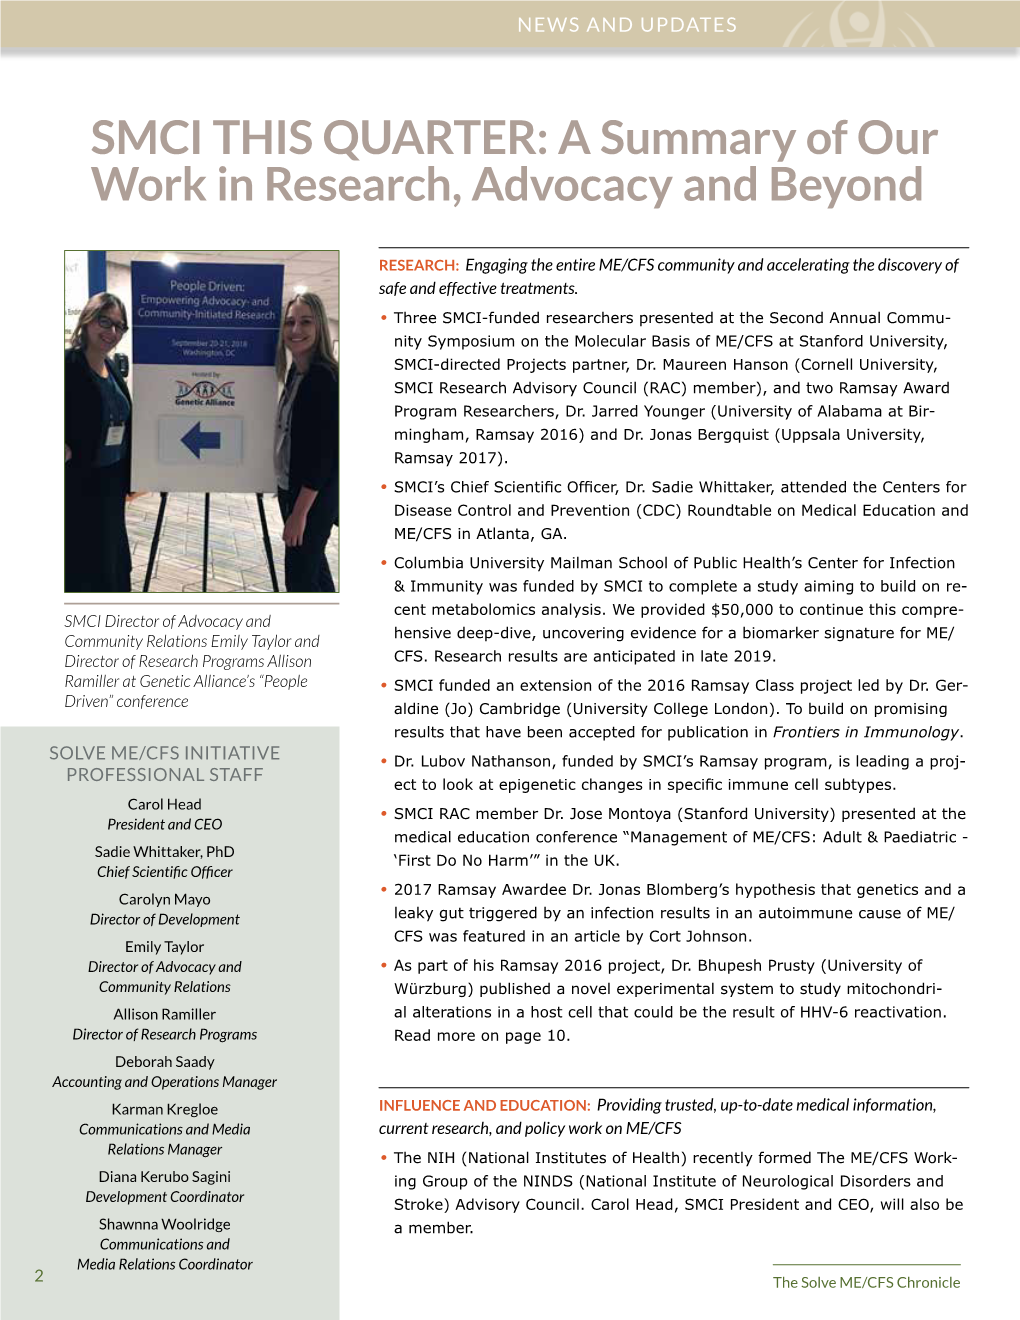 SMCI THIS QUARTER: a Summary of Our Work in Research, Advocacy and Beyond